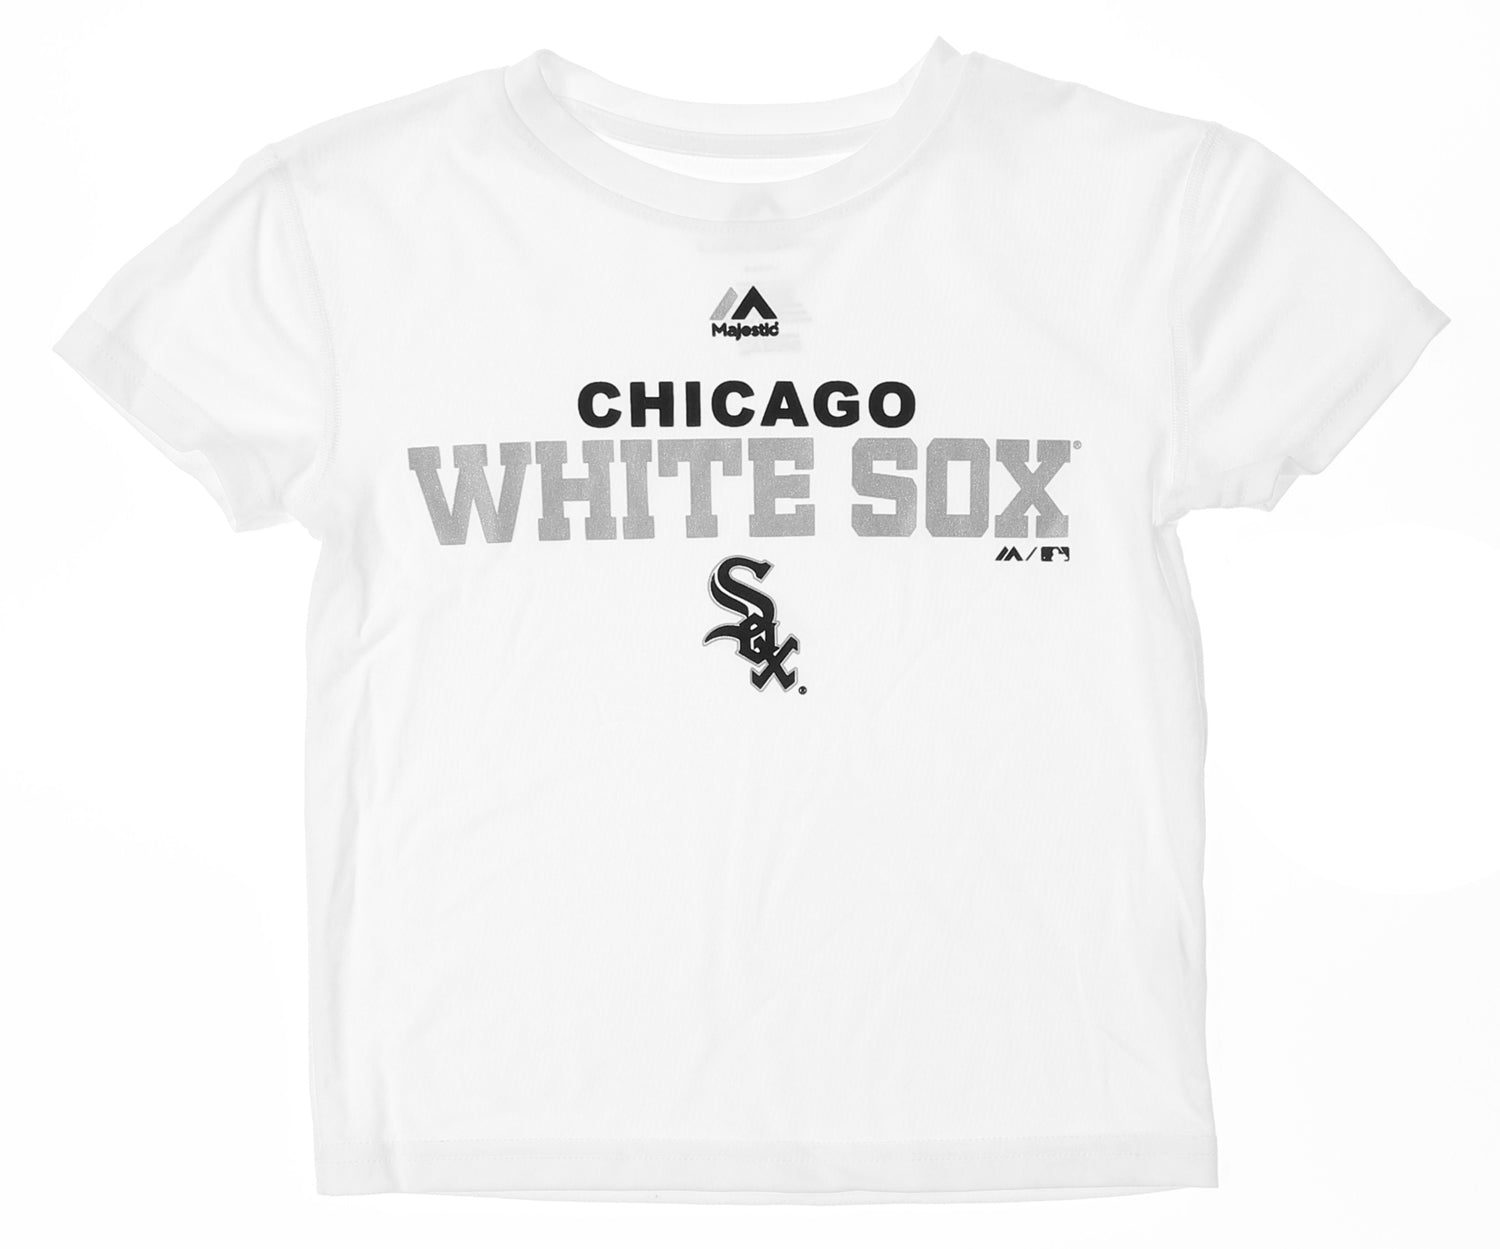 Majestic MLB Kids Chicago White Sox Roll Call Performance Tee Shirt, White - Large (7)